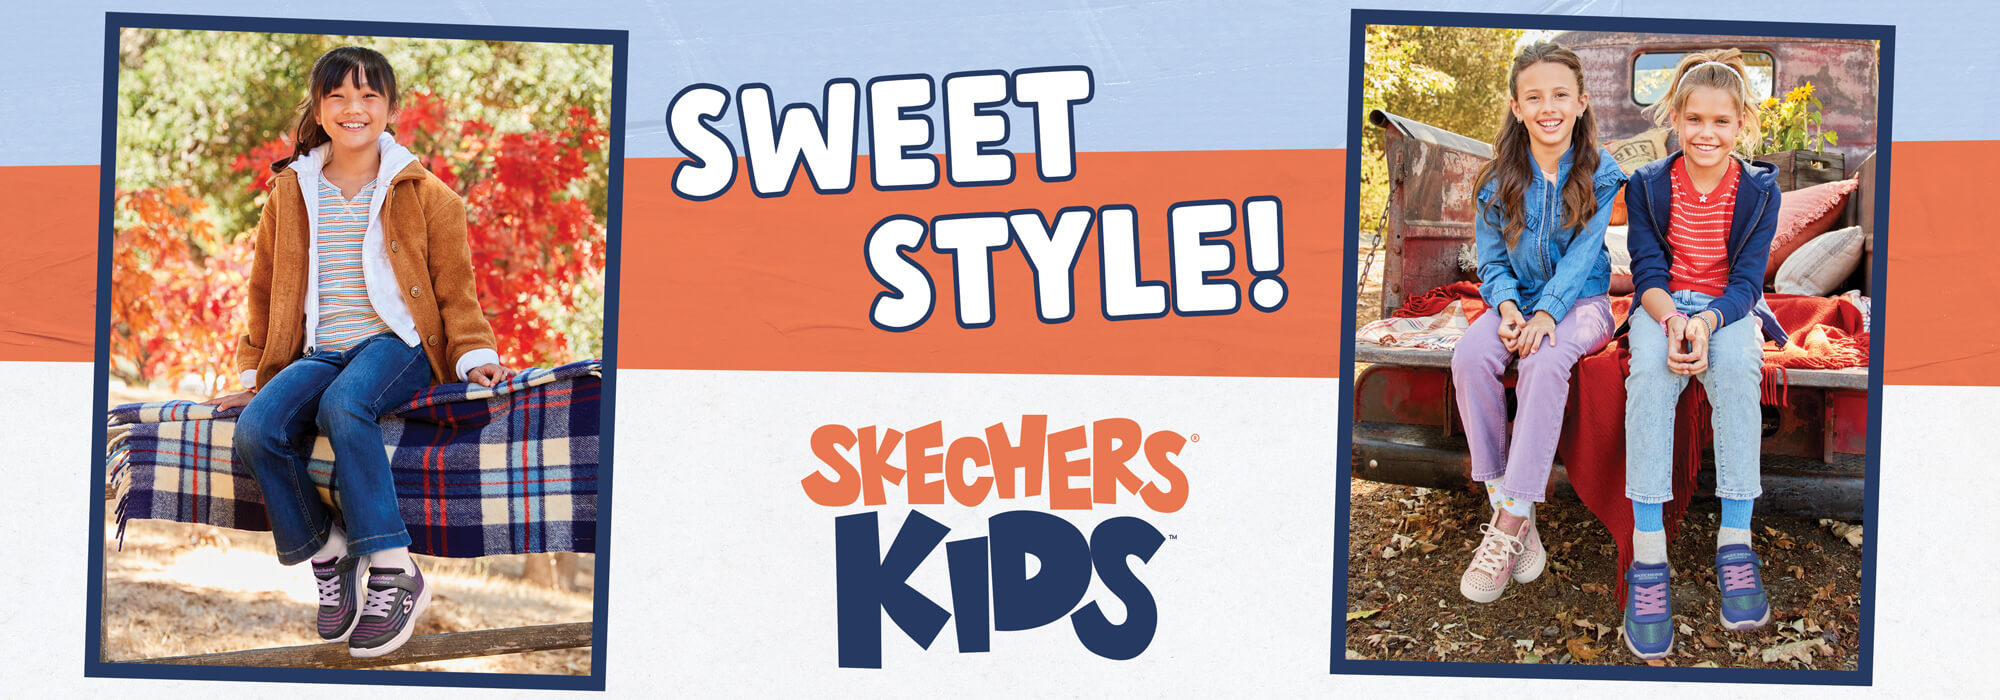 Skecher shoes for kids.